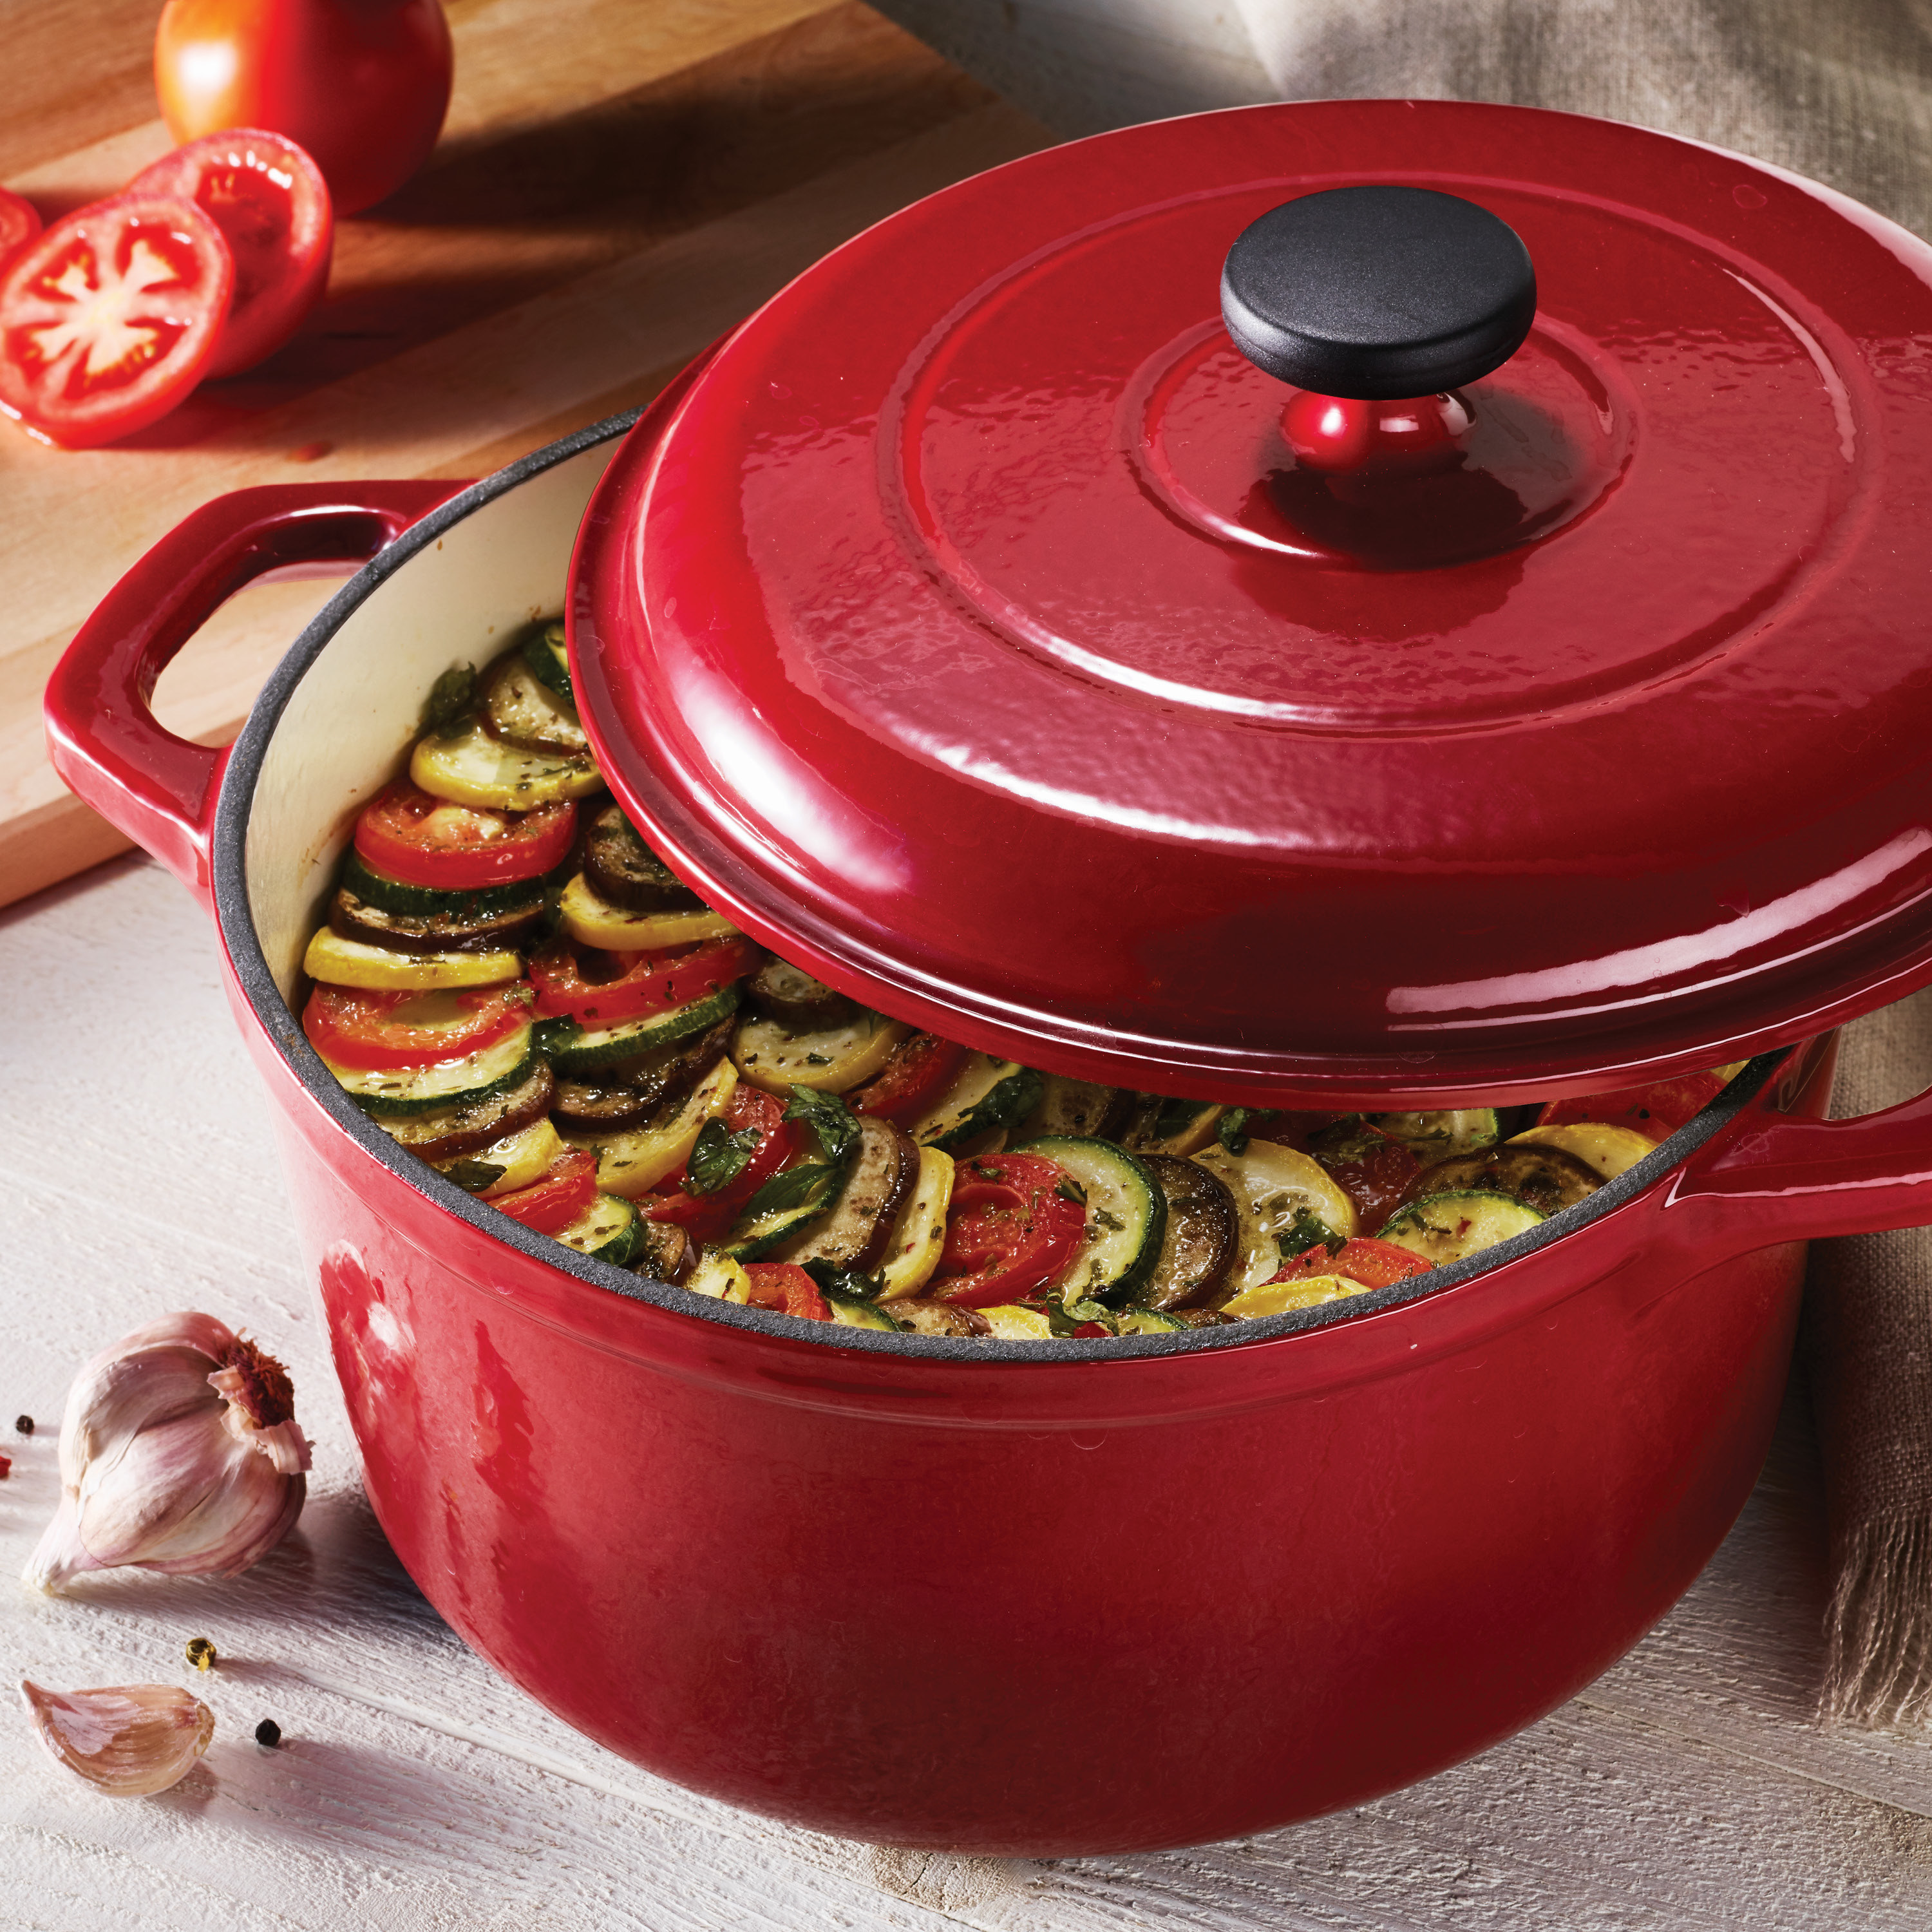 red dutch oven with vegetables being cooked inside